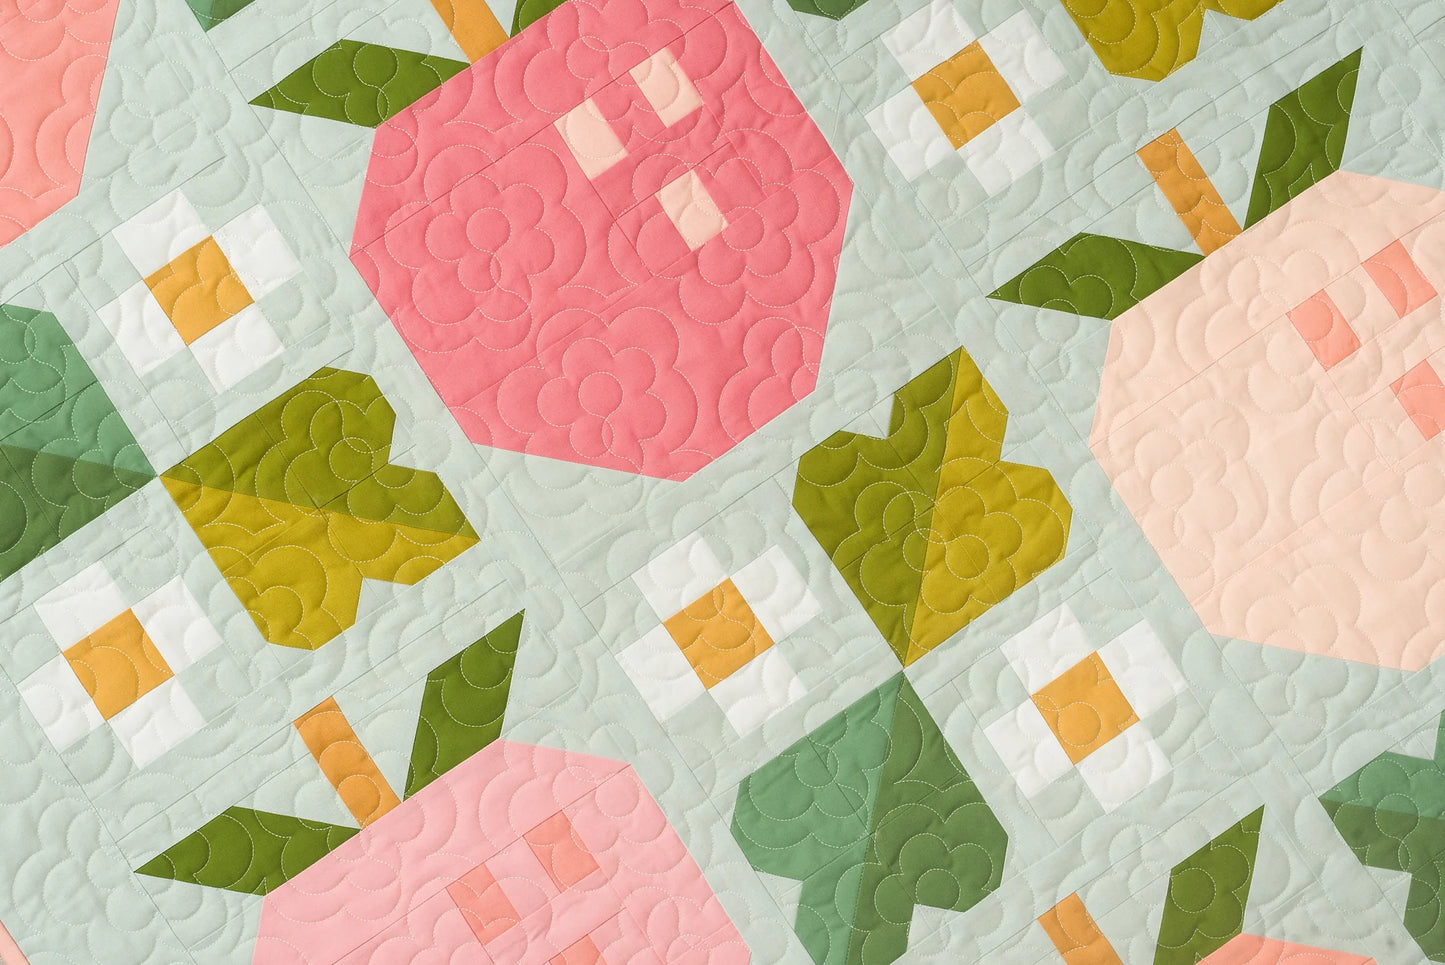 Pen and Paper Patterns | Pineberry Quilt